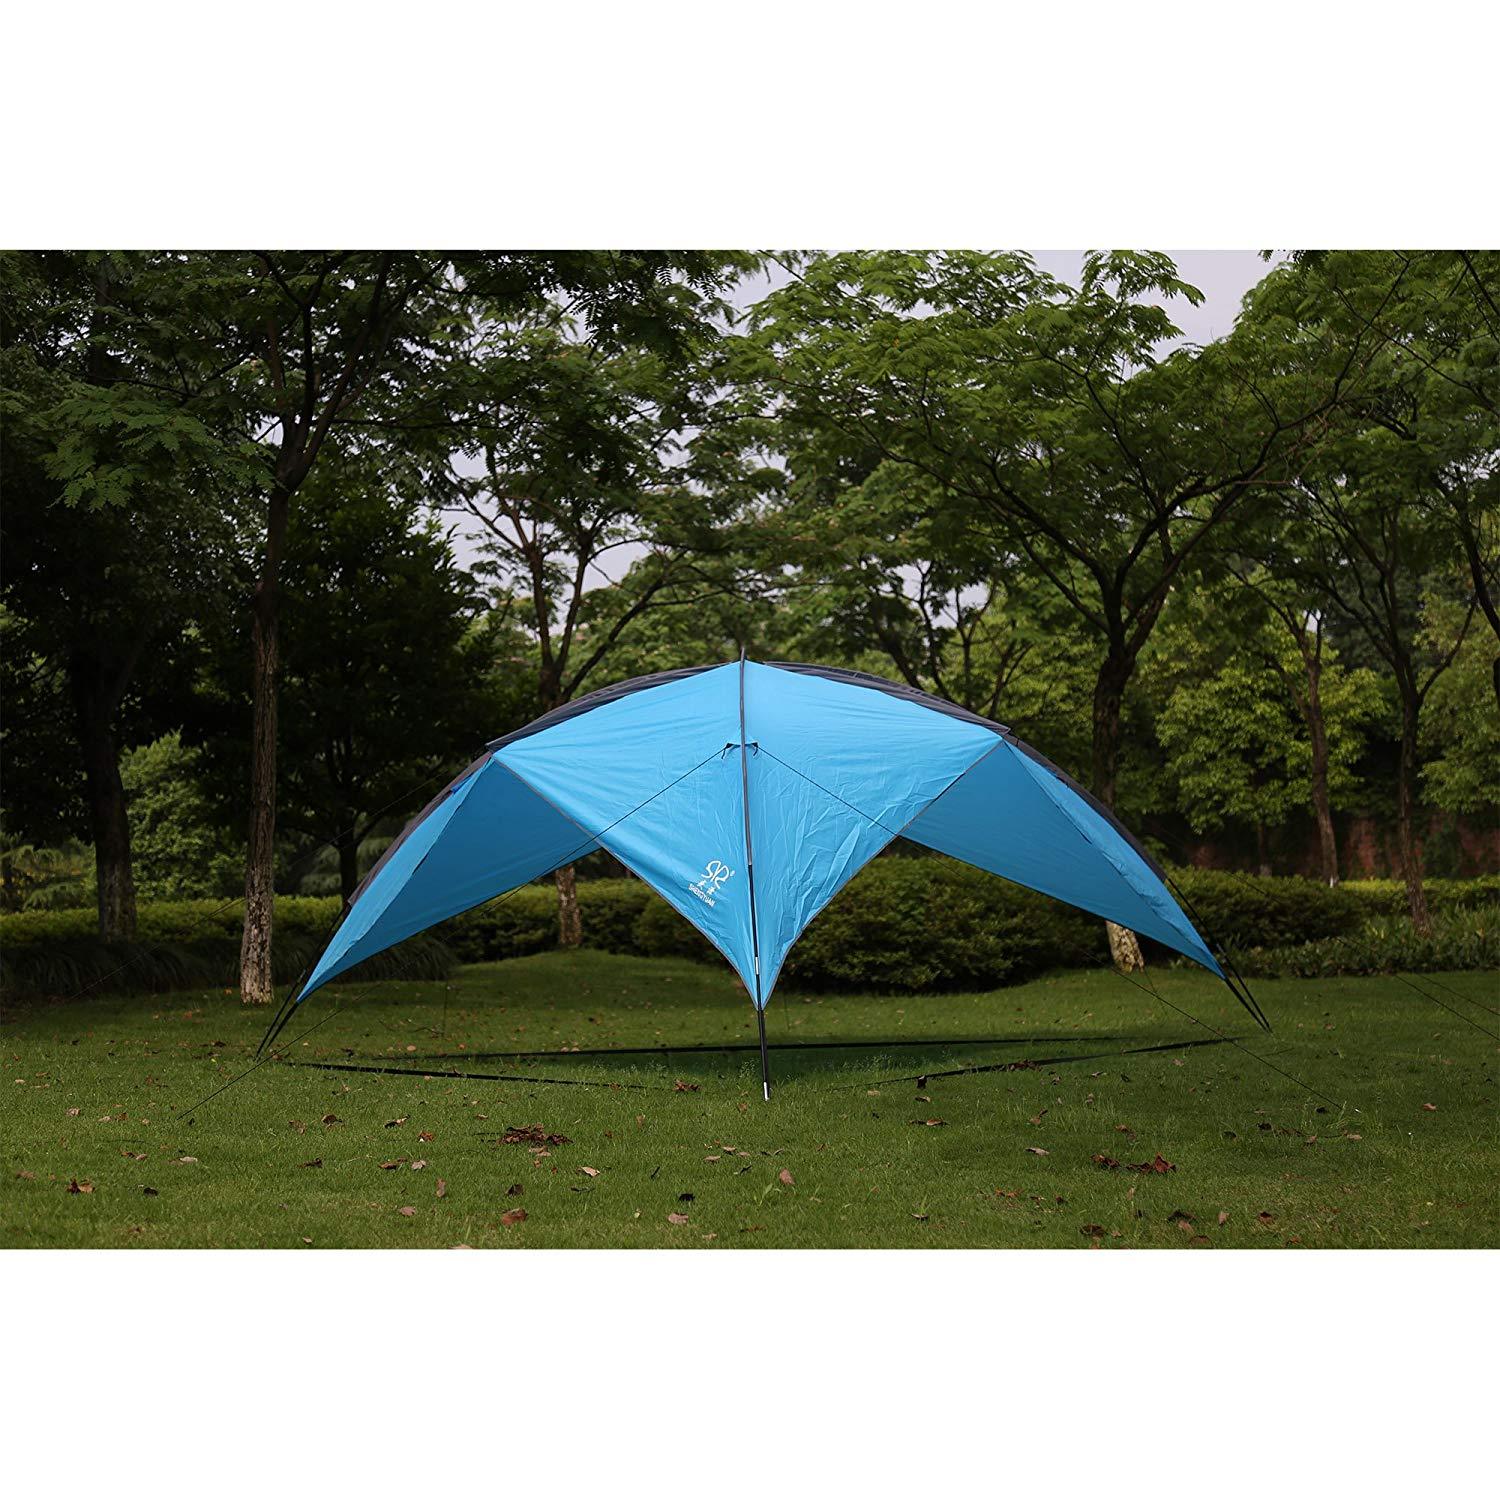 Bosonshop Outdoor Camping Tents, Sun Awning Waterproof, Large Triangle Shade, Blue